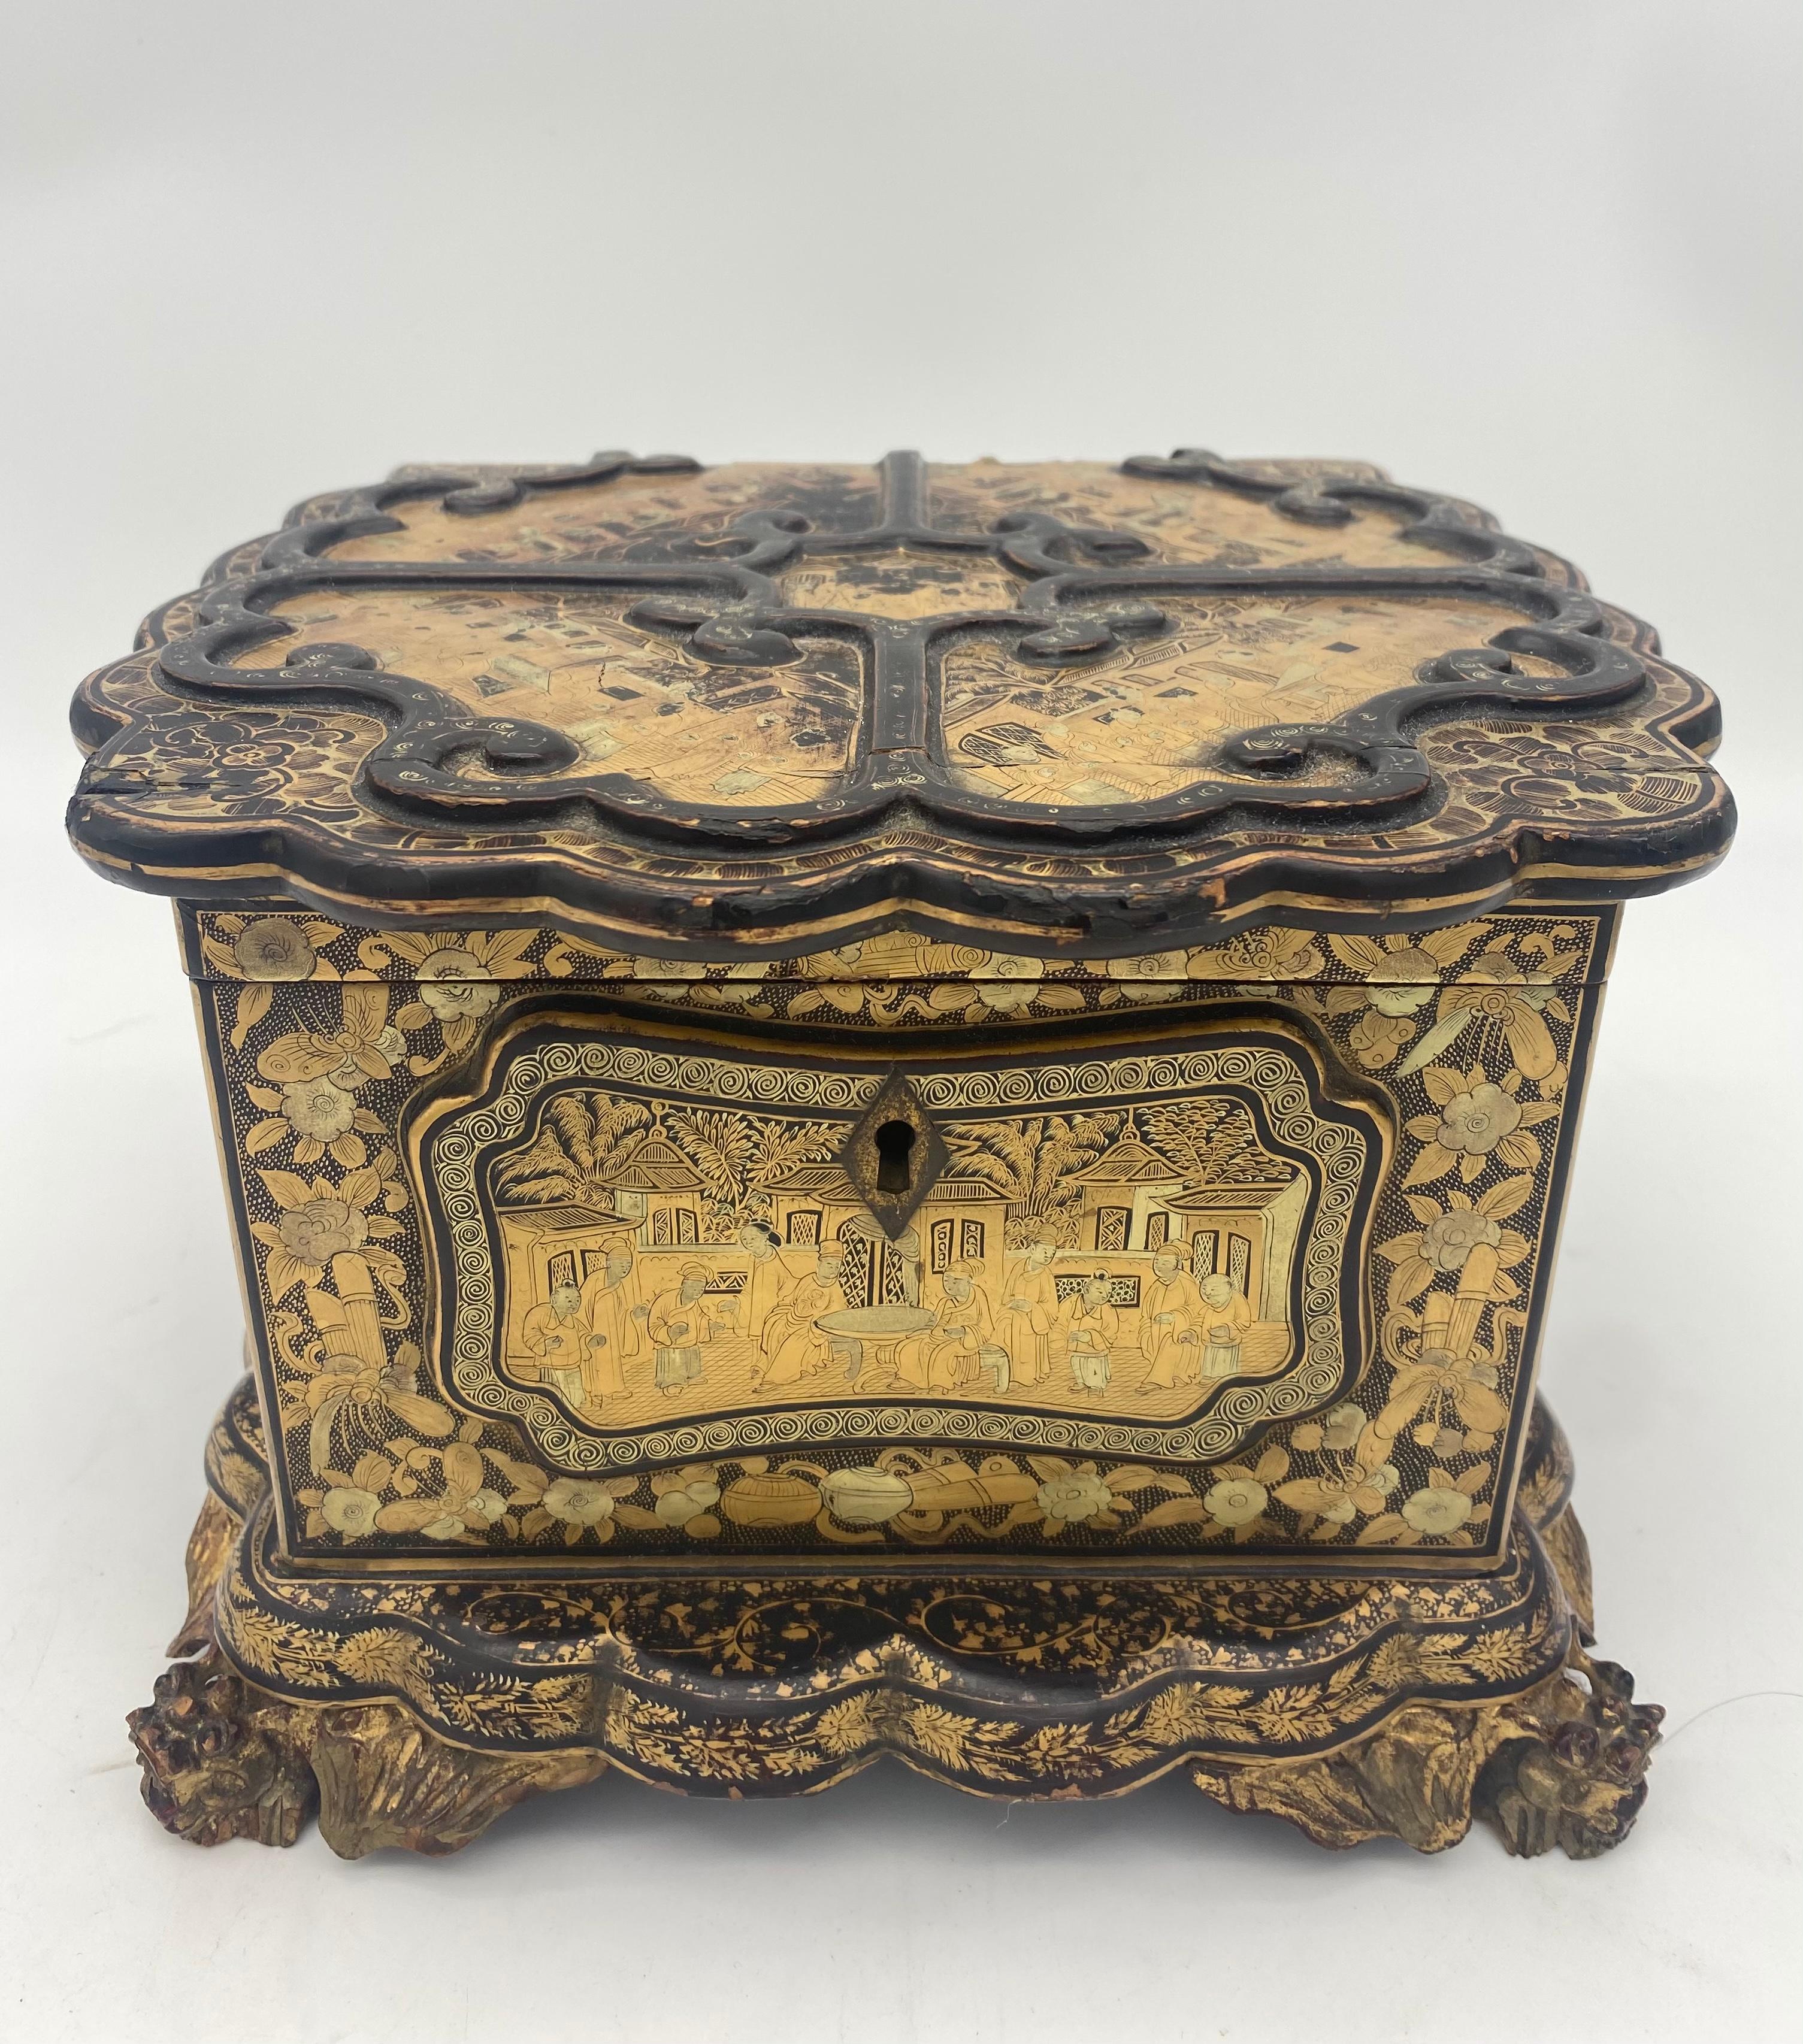 Unique 19th Century  Export Chinese Gilt Chinoiserie Lacquer Box For Sale 2